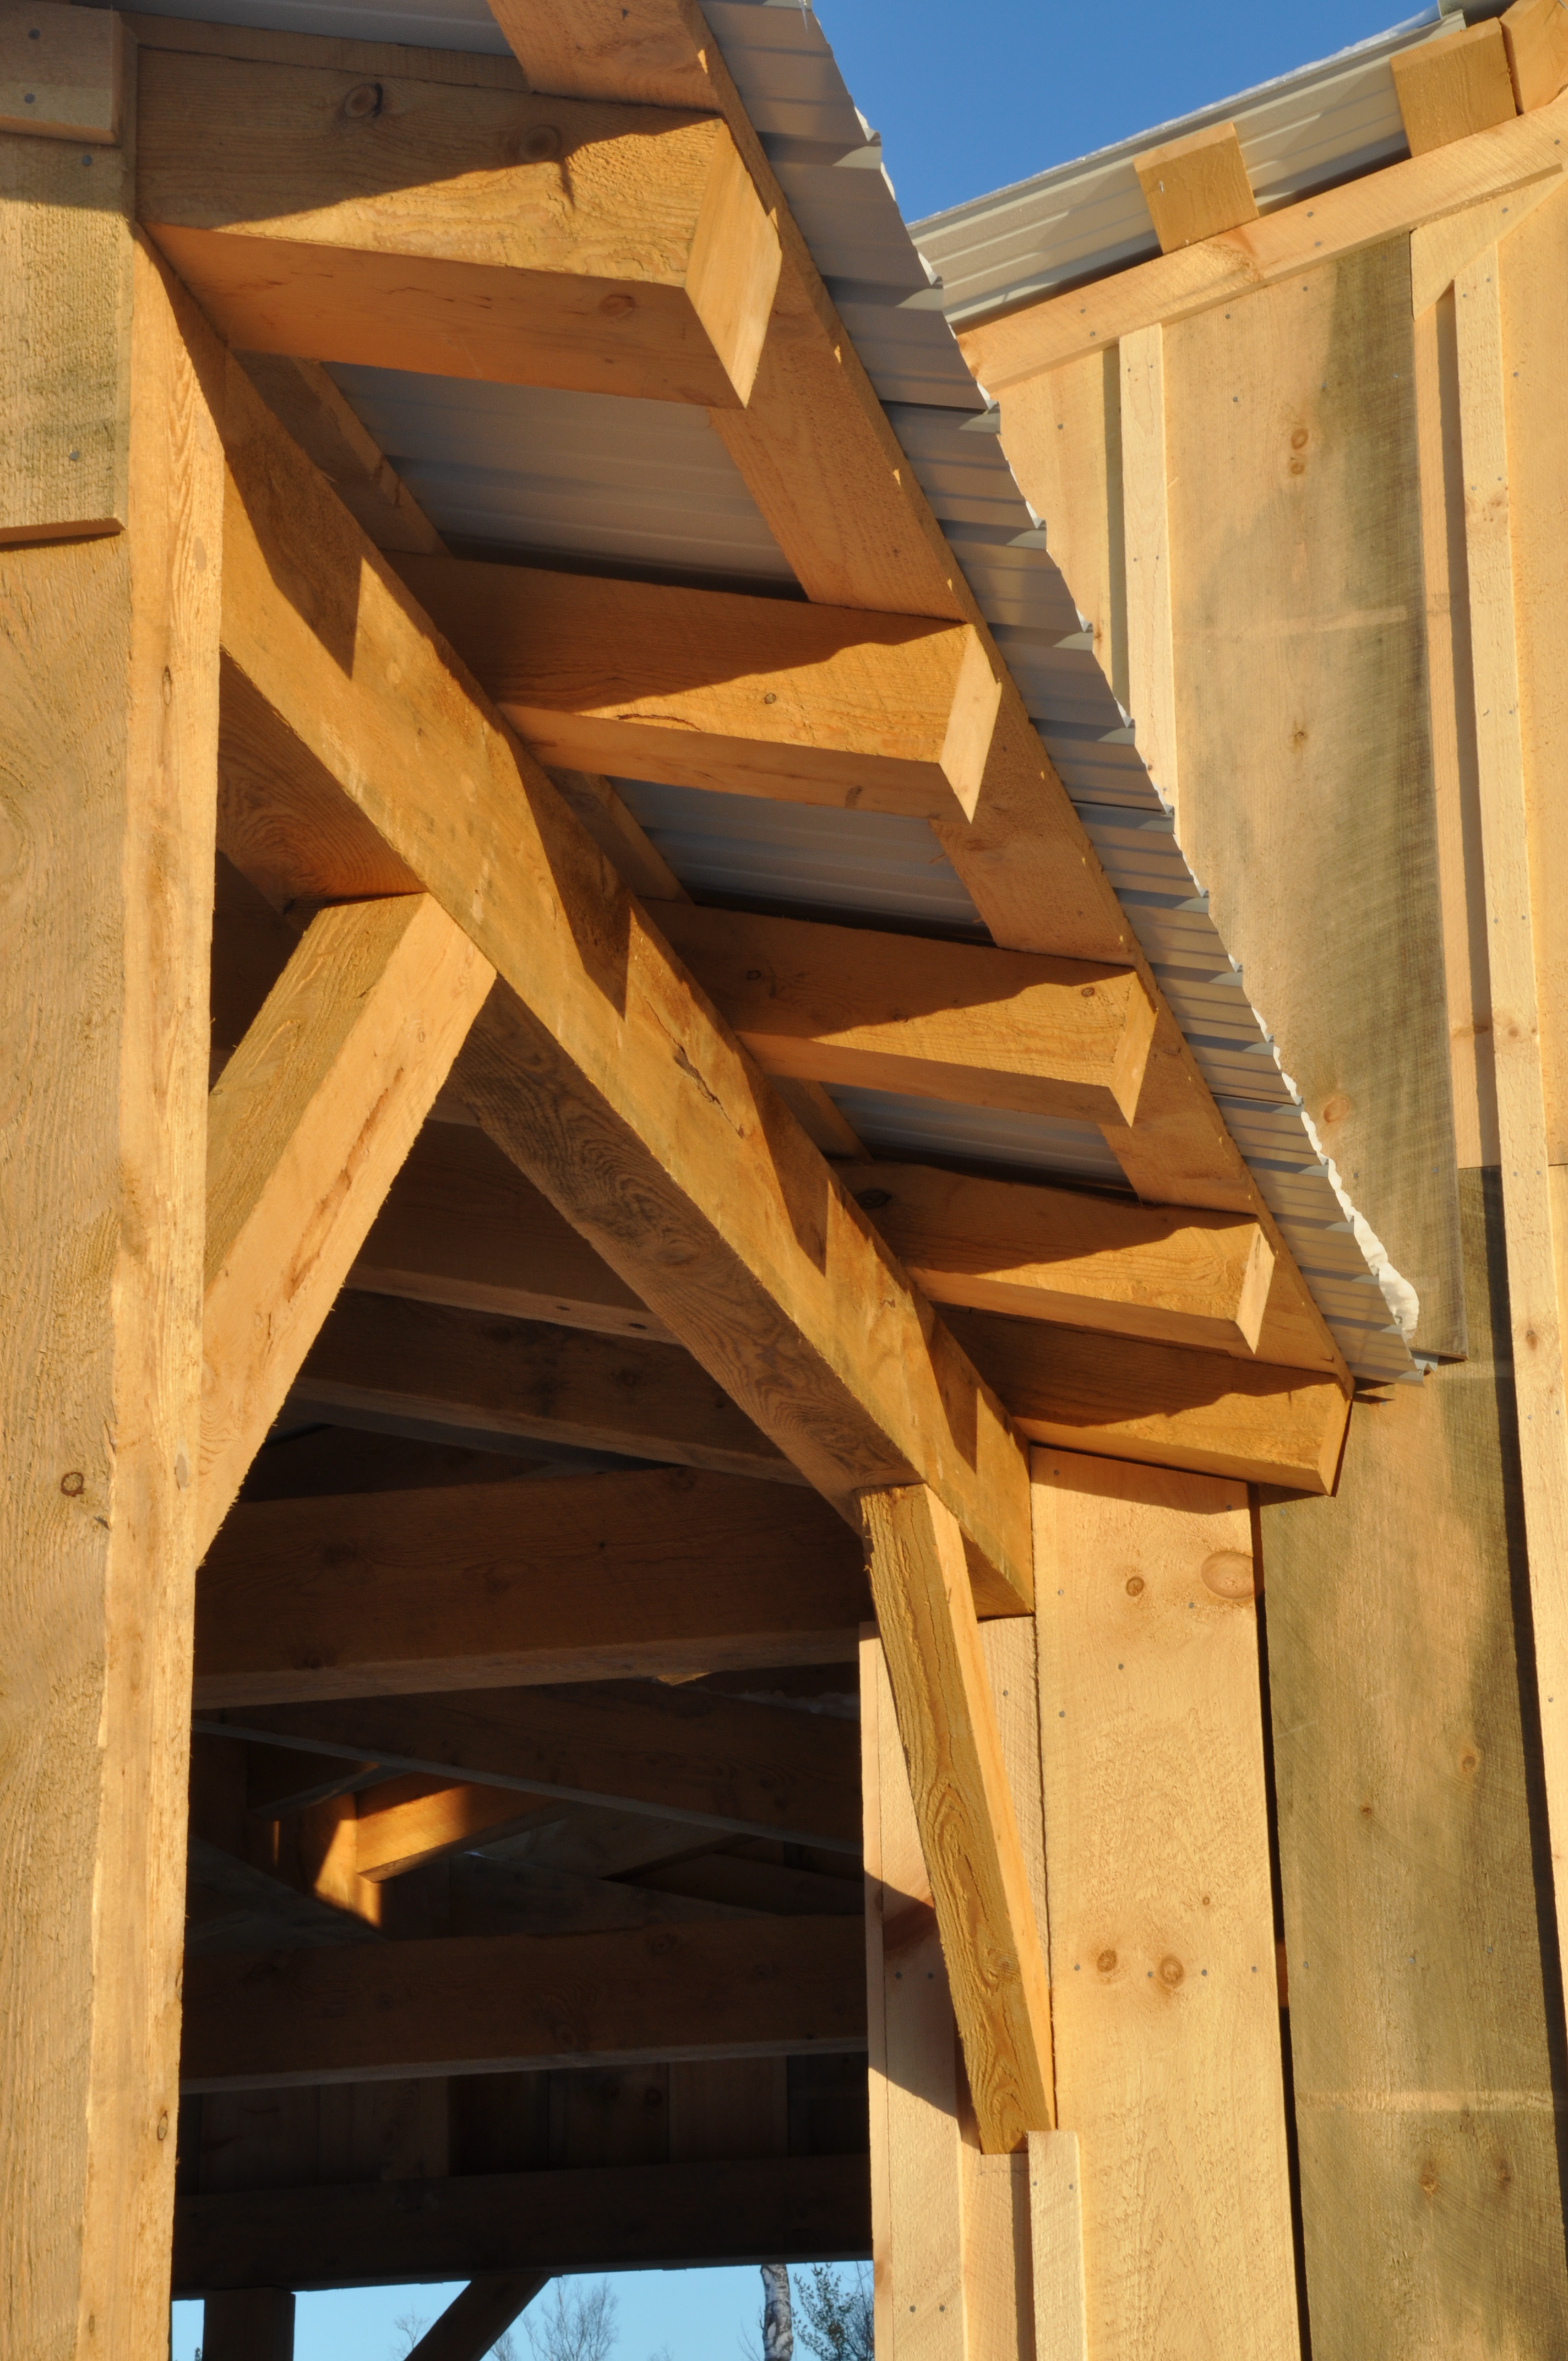 Sandy @VTWorks | The Timber Frame Experience